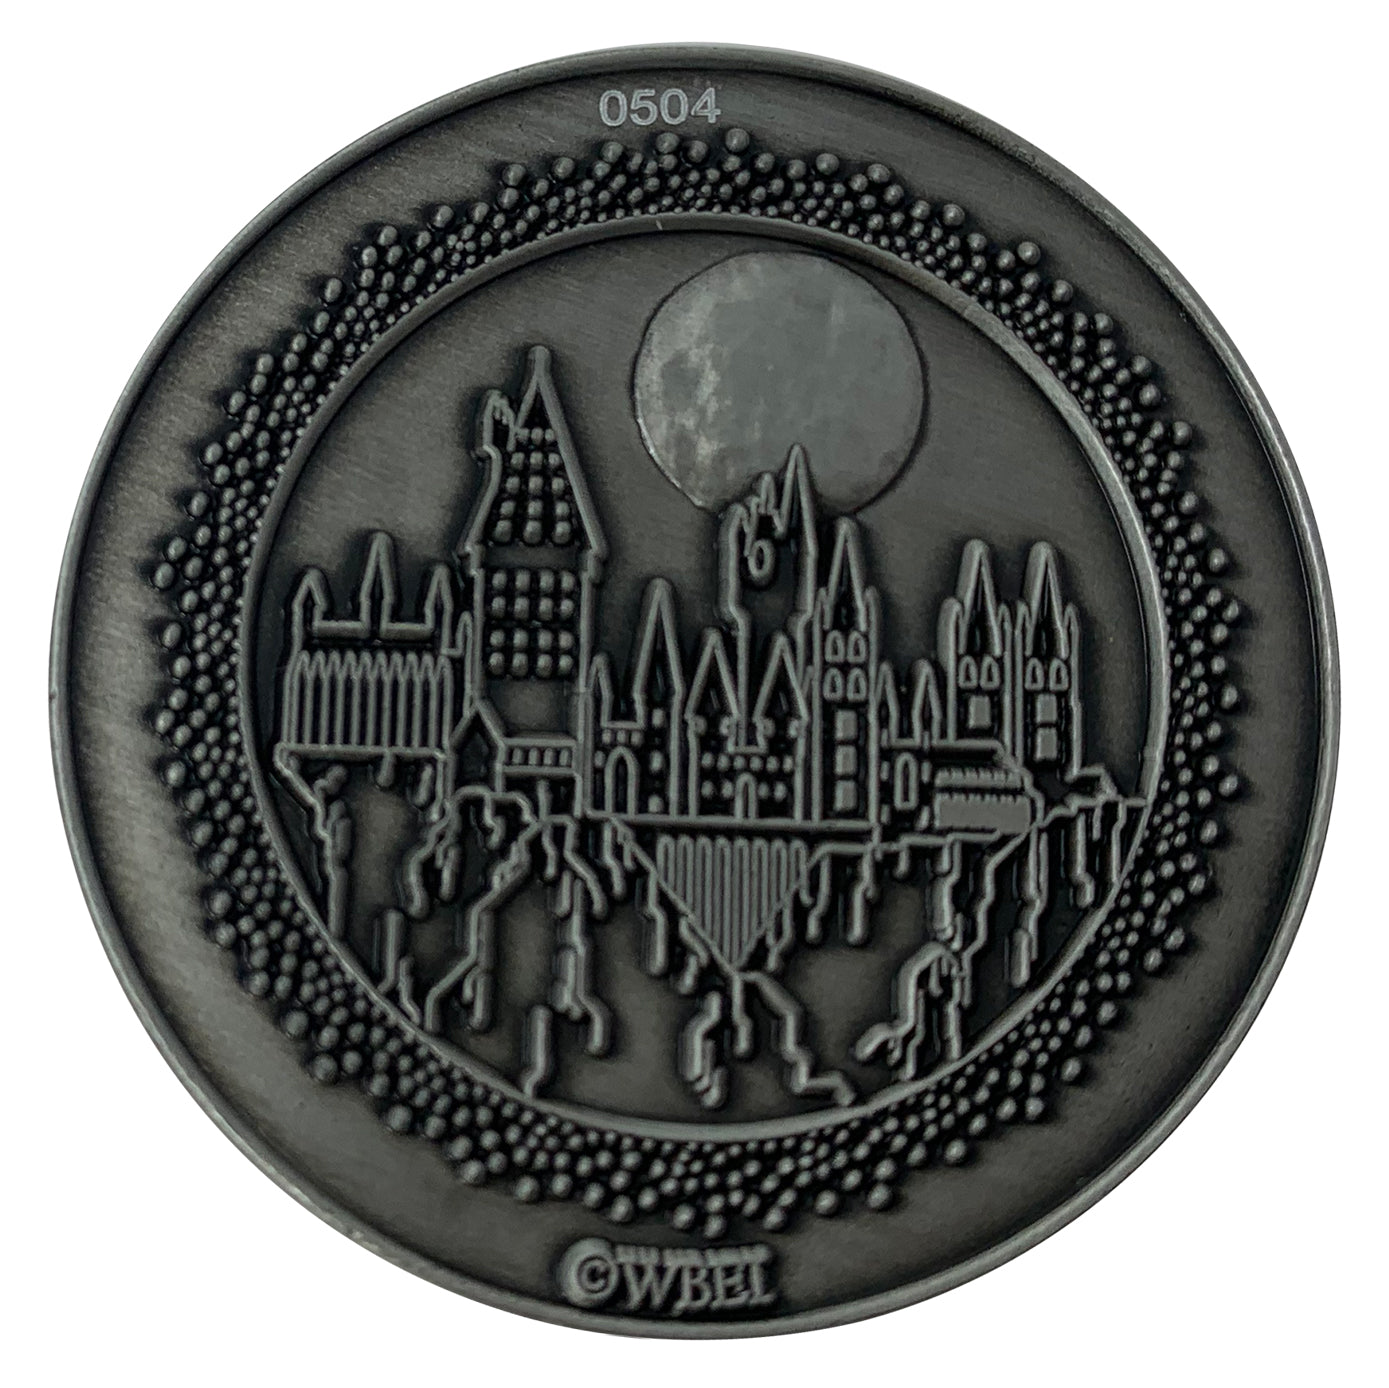 Harry Potter Limited Edition Ron Weasley Collectible Coin